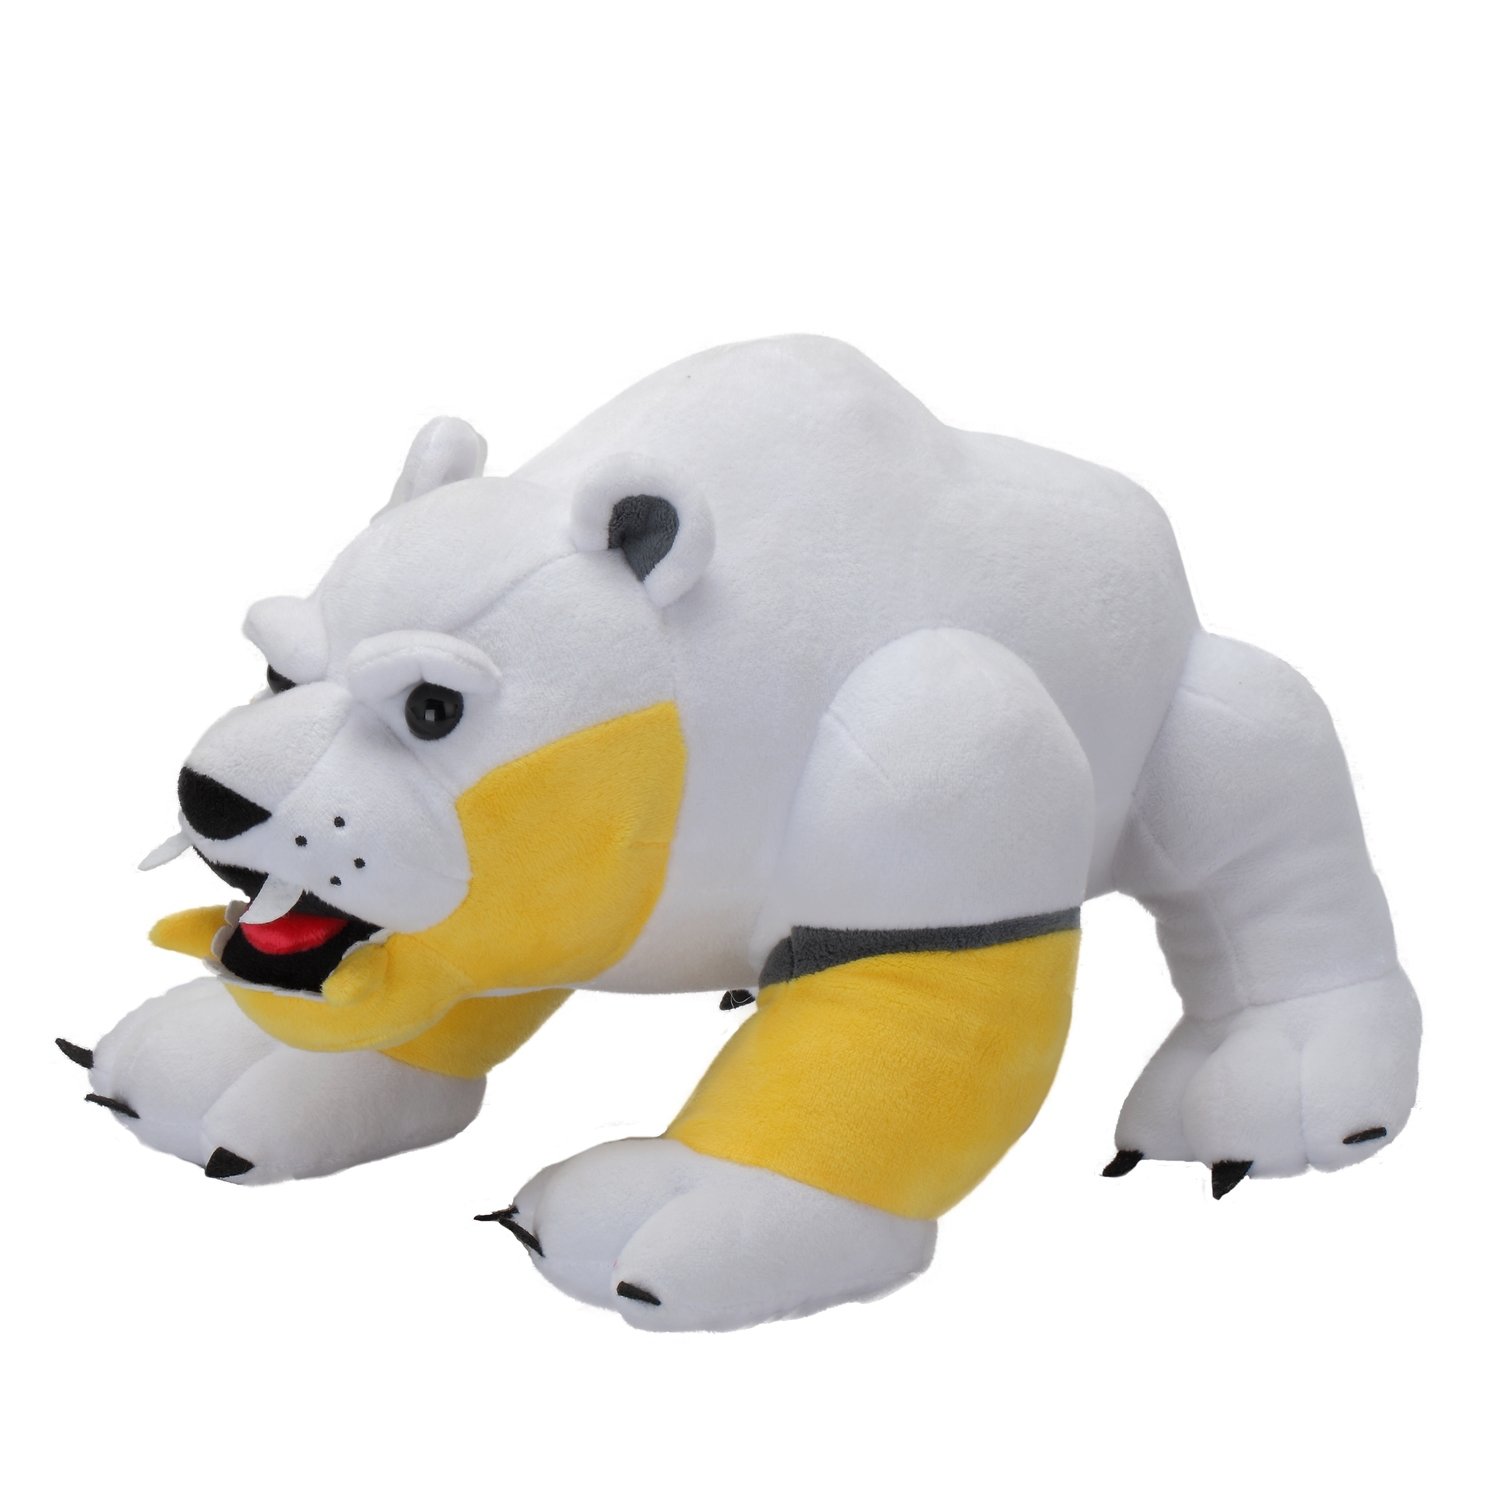 Rivals of Aether Golden Etalus Plush and DLC